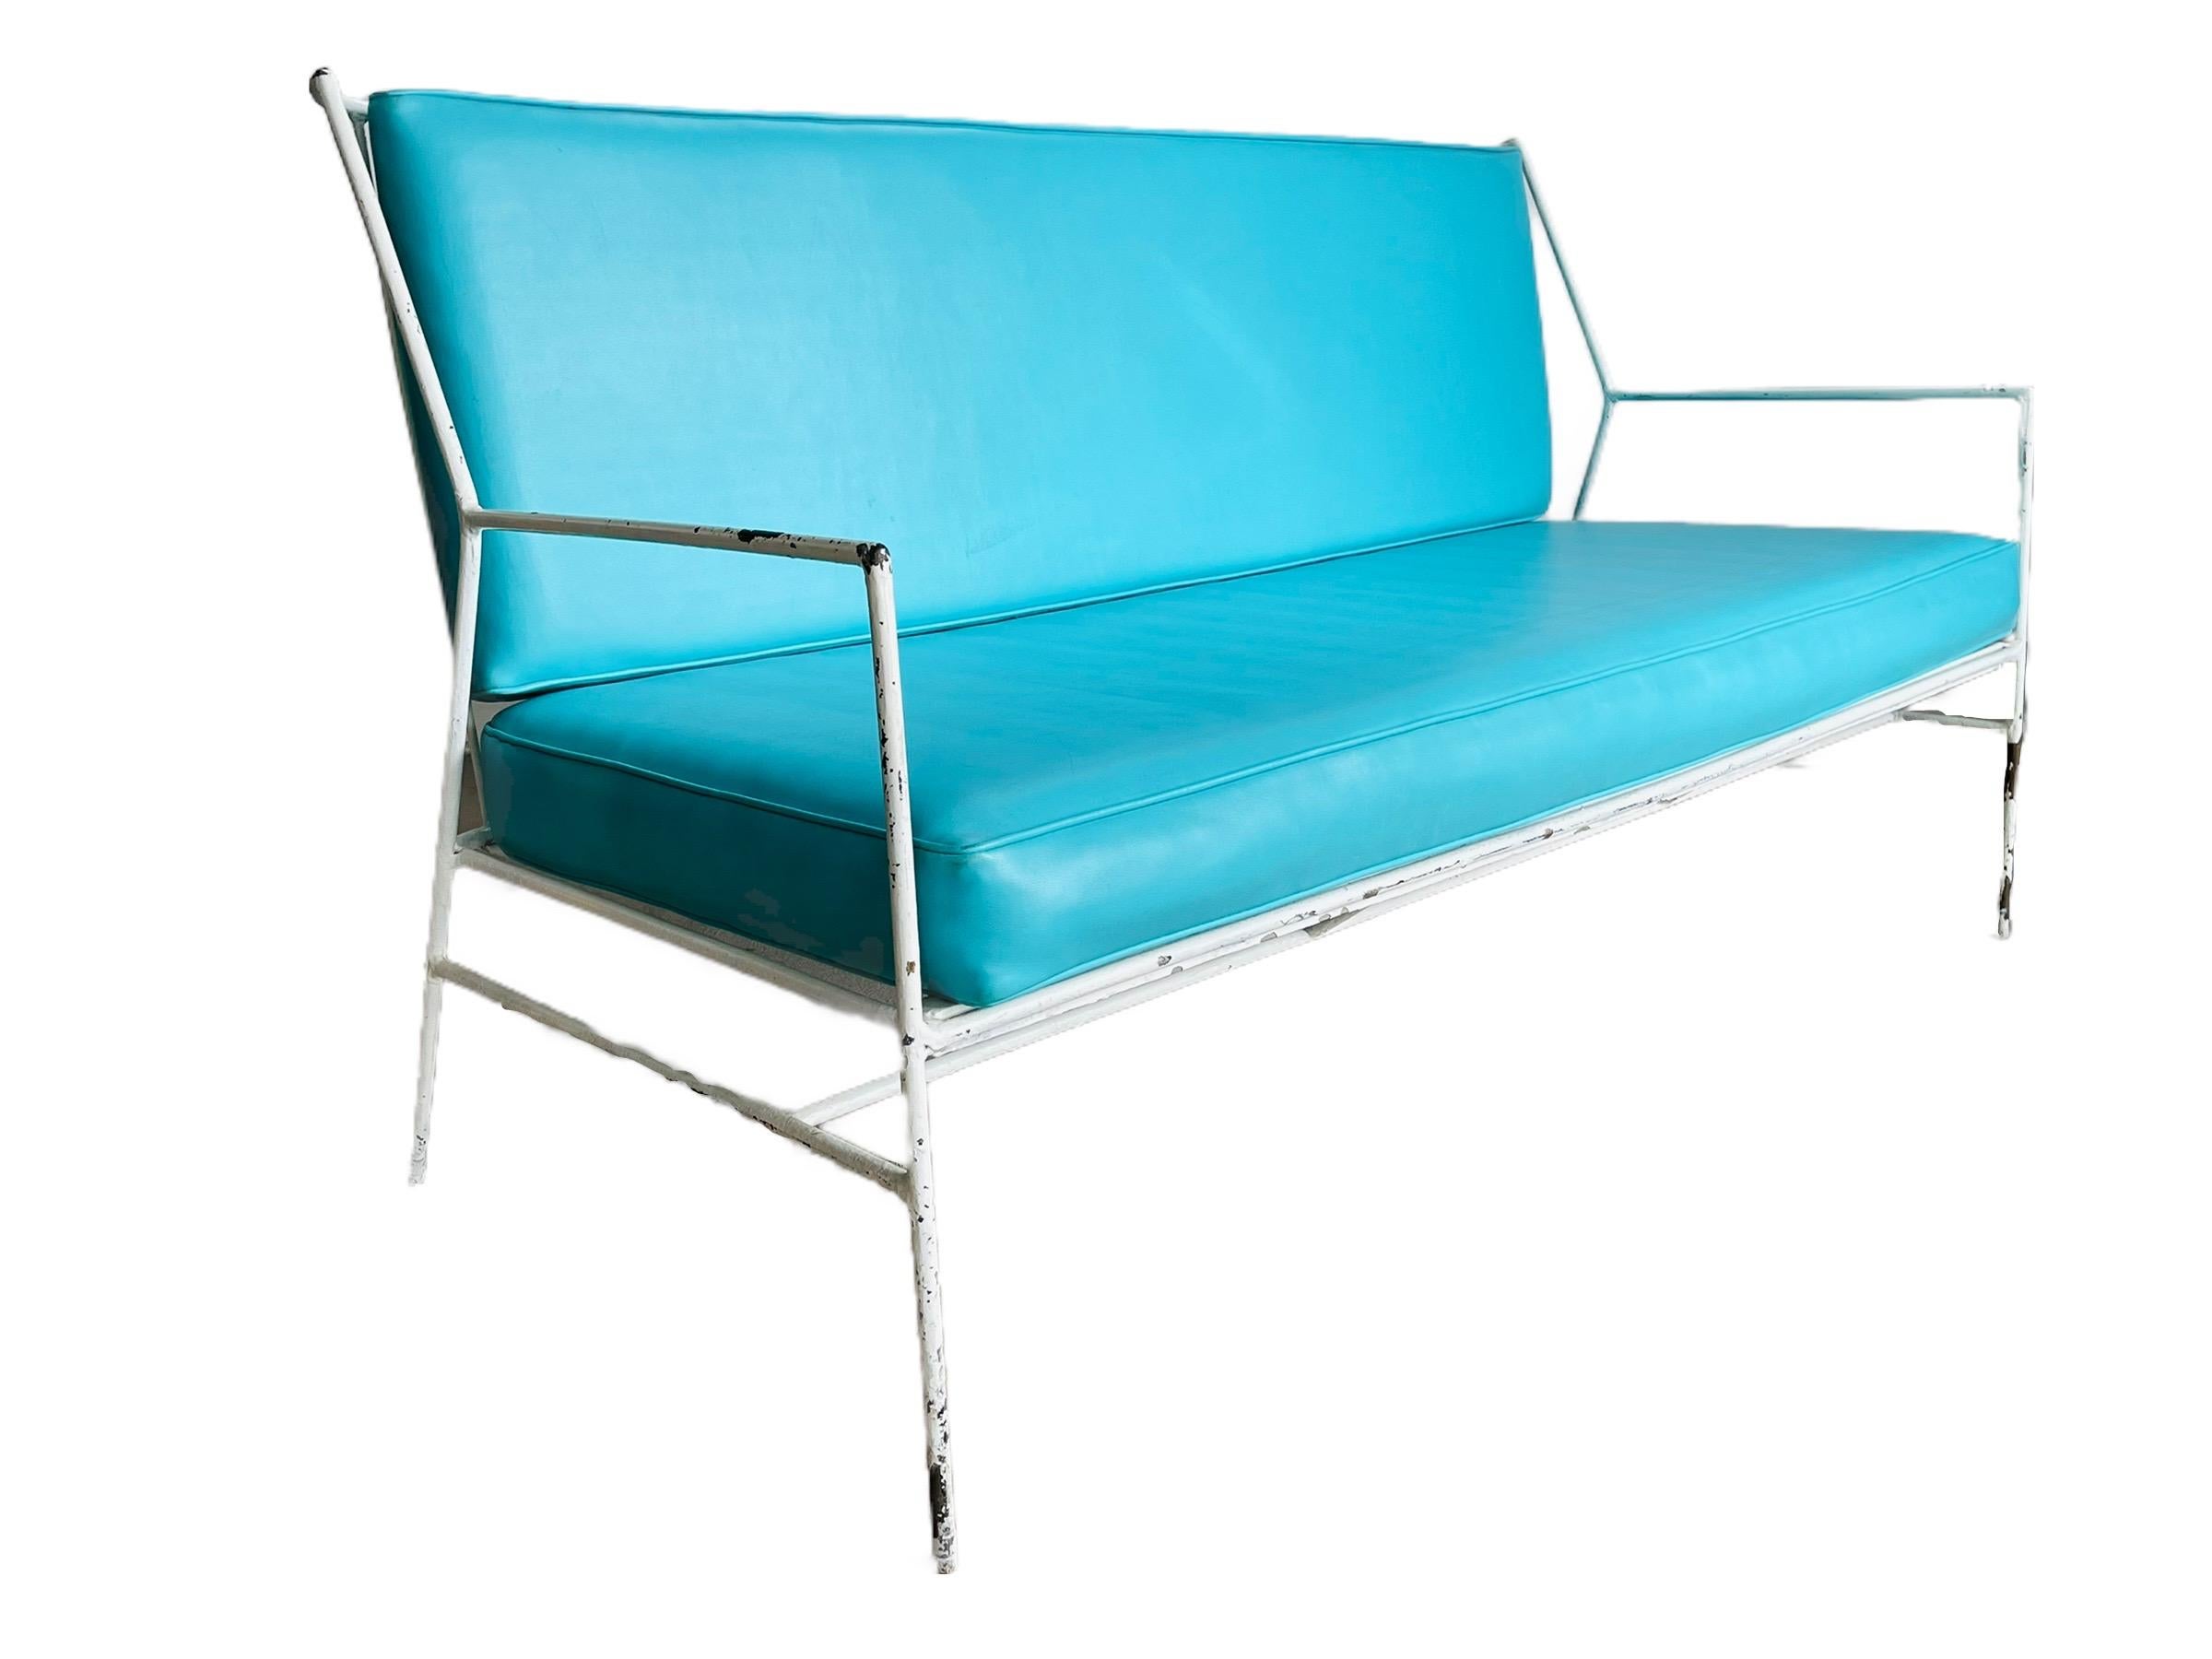 Iconic and rare metal sofa with original turquoise cushions designed by Paul McCobb as part of his Pavilion collection, circa 1950s. Some paint chip to the frame otherwise in good condition. Minor wear consistent with age and use. 

Measures: W